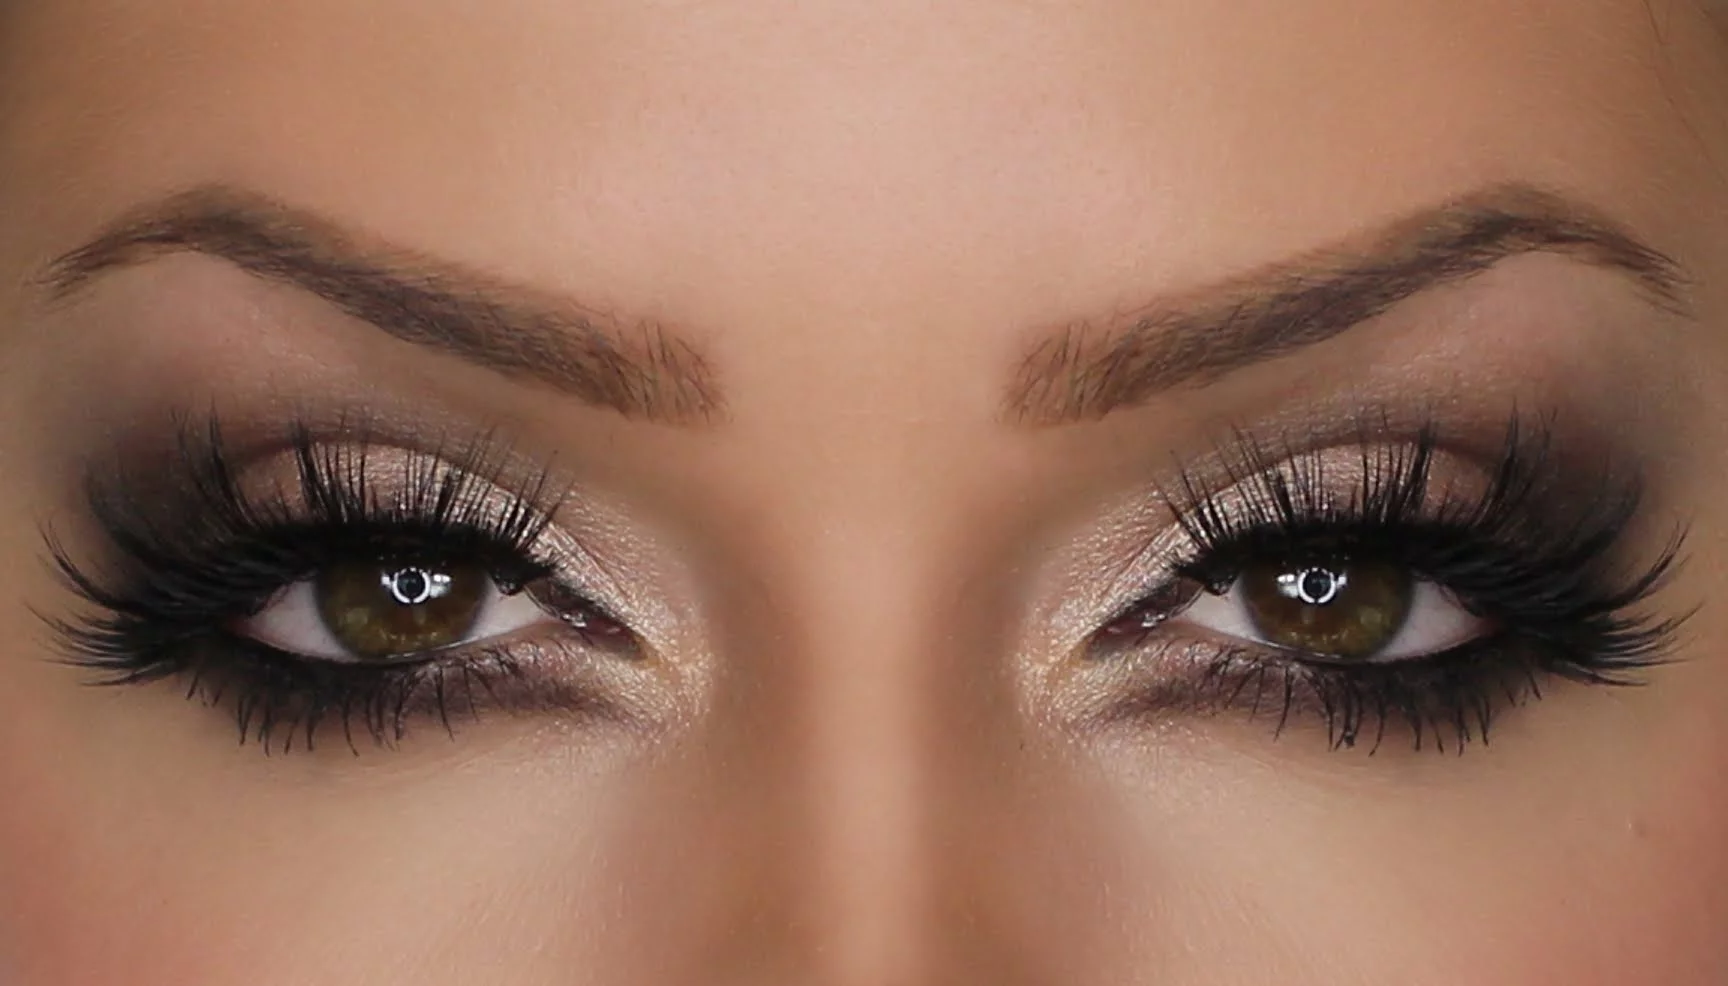 Sultry Eye Look with Eyelash Extensions